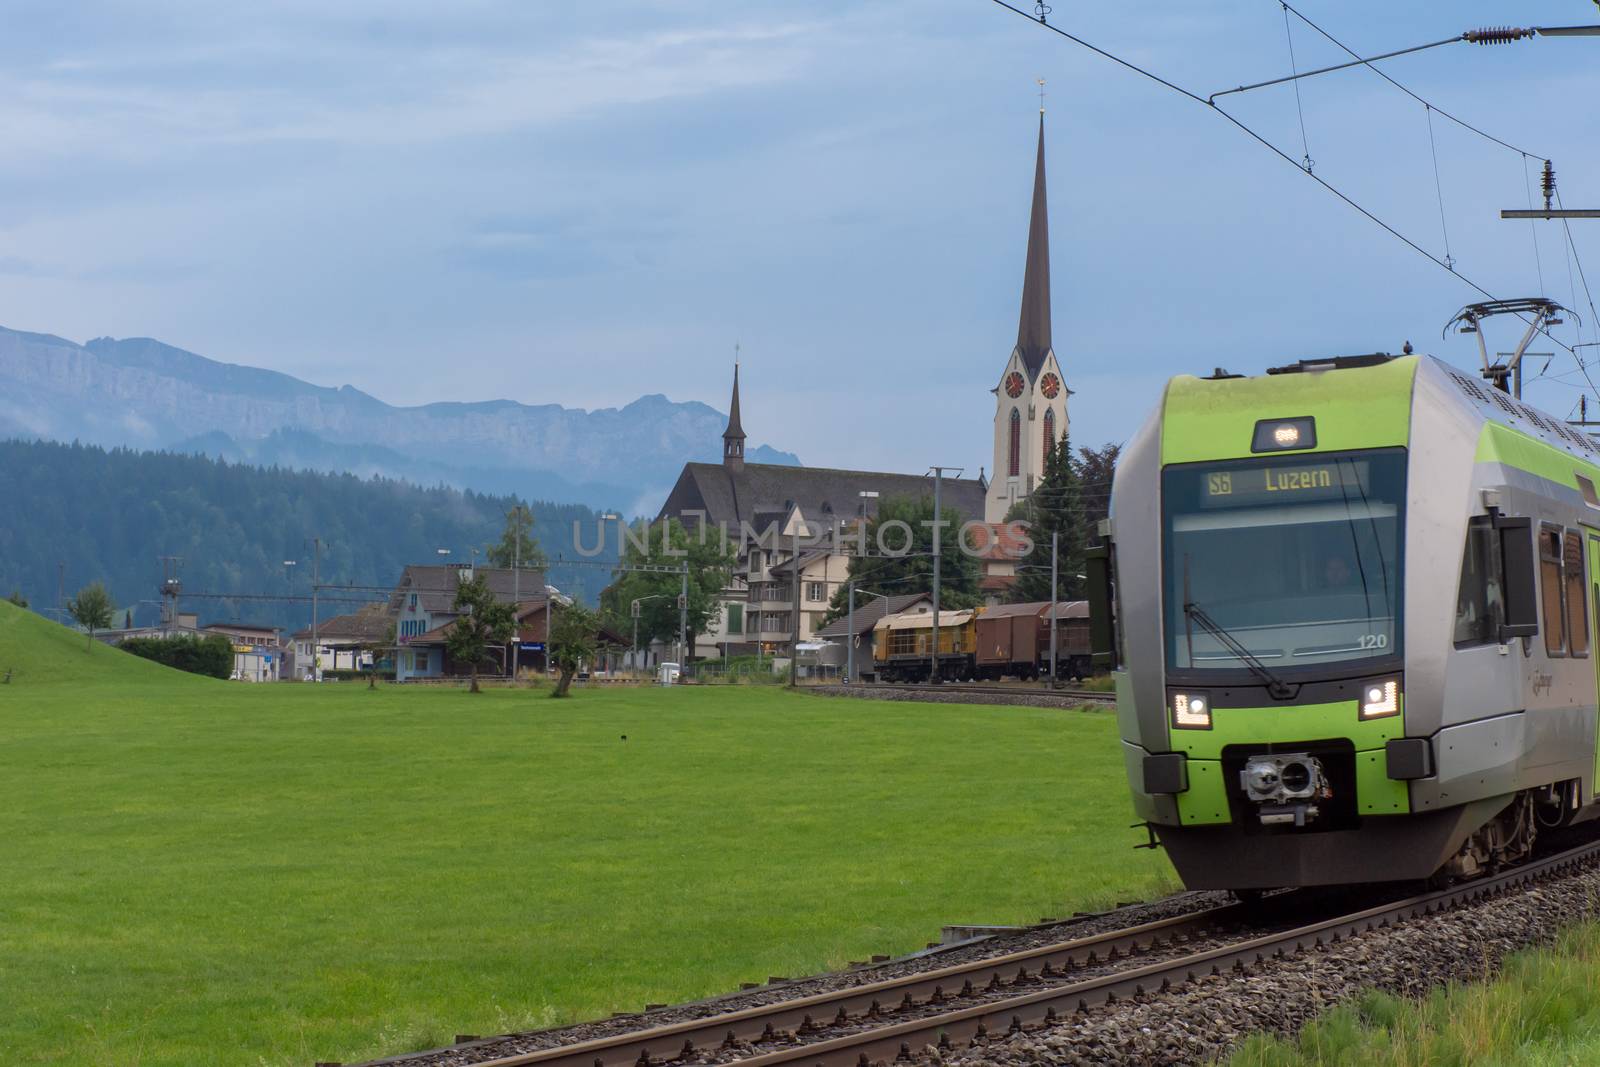 "Thun, Thun/Switzerland - 08/11/2018: European passenger train on its way to Luzern, Switzerland passes a small town, cathedral and nearby mountains/Alps.